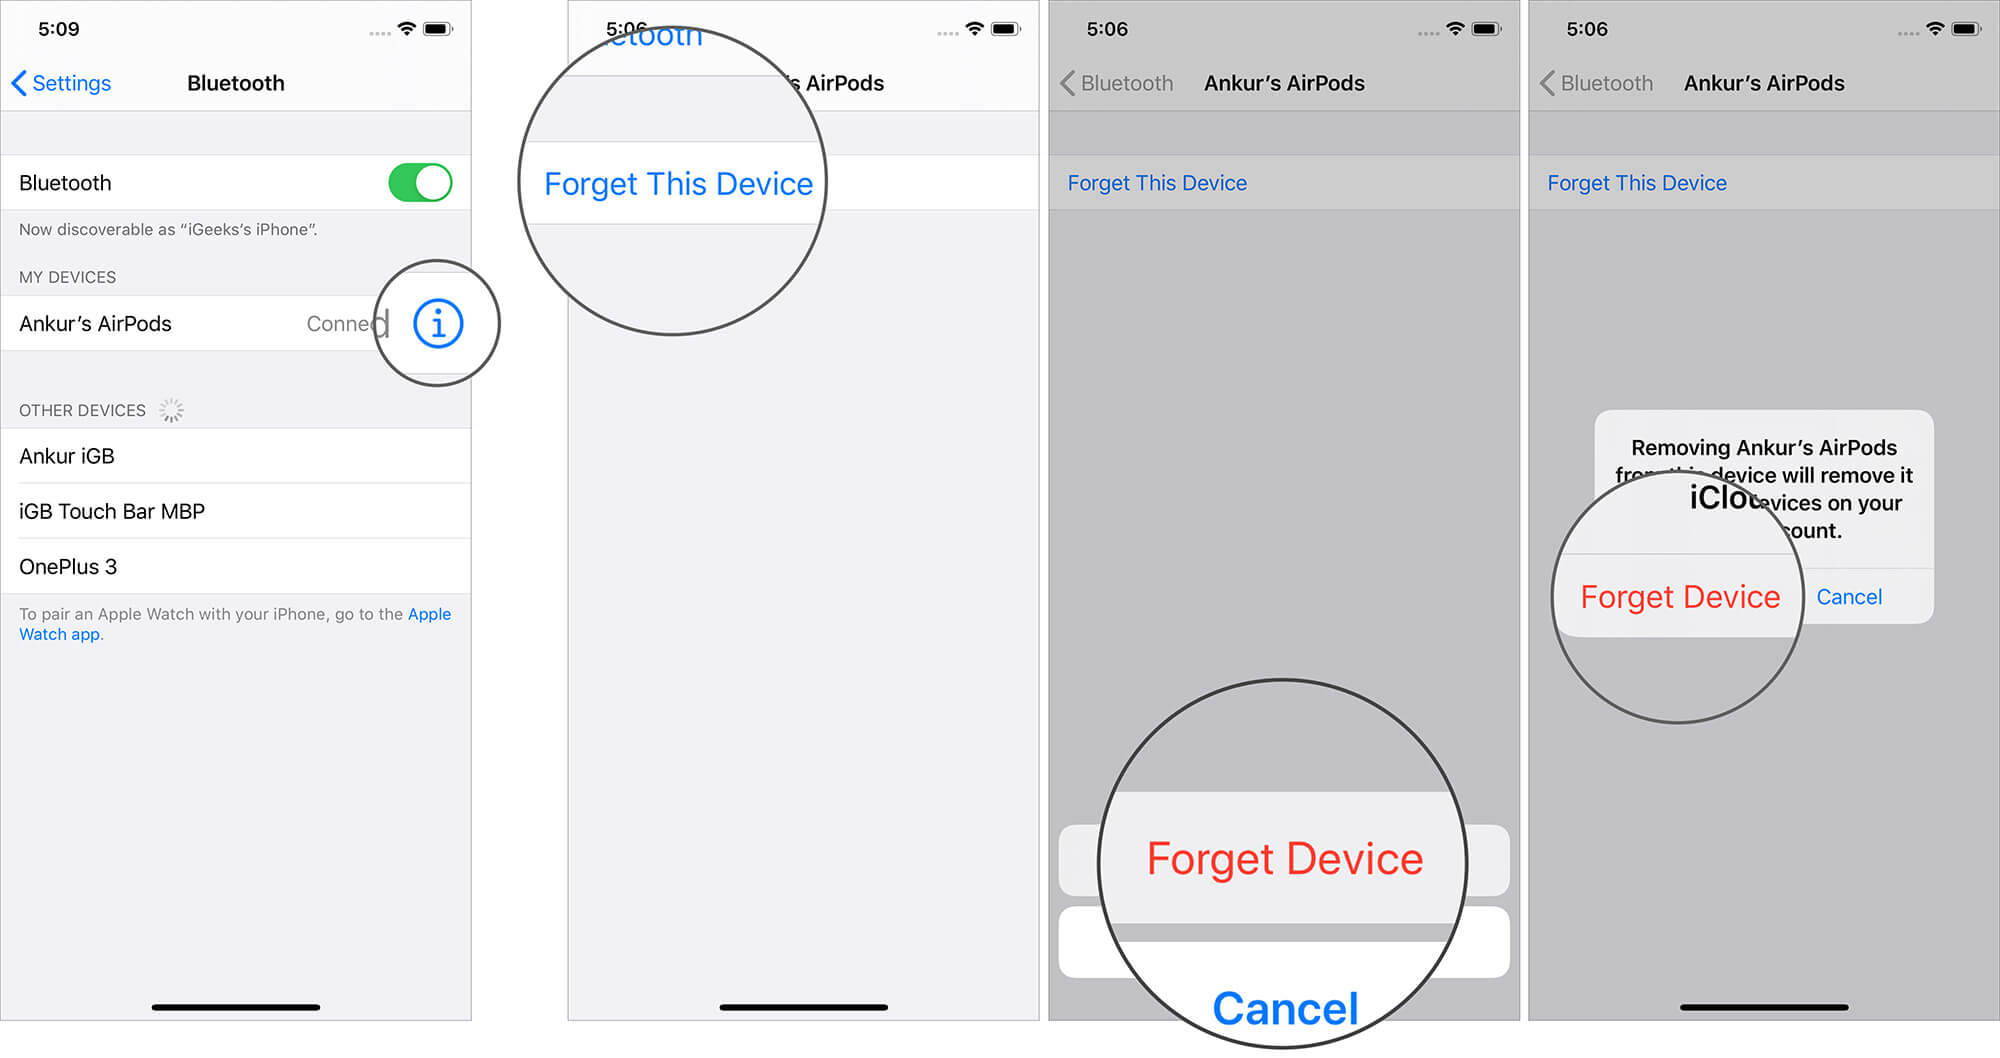 Tap on Forget This Device to Disconnect AirPods from iPhone